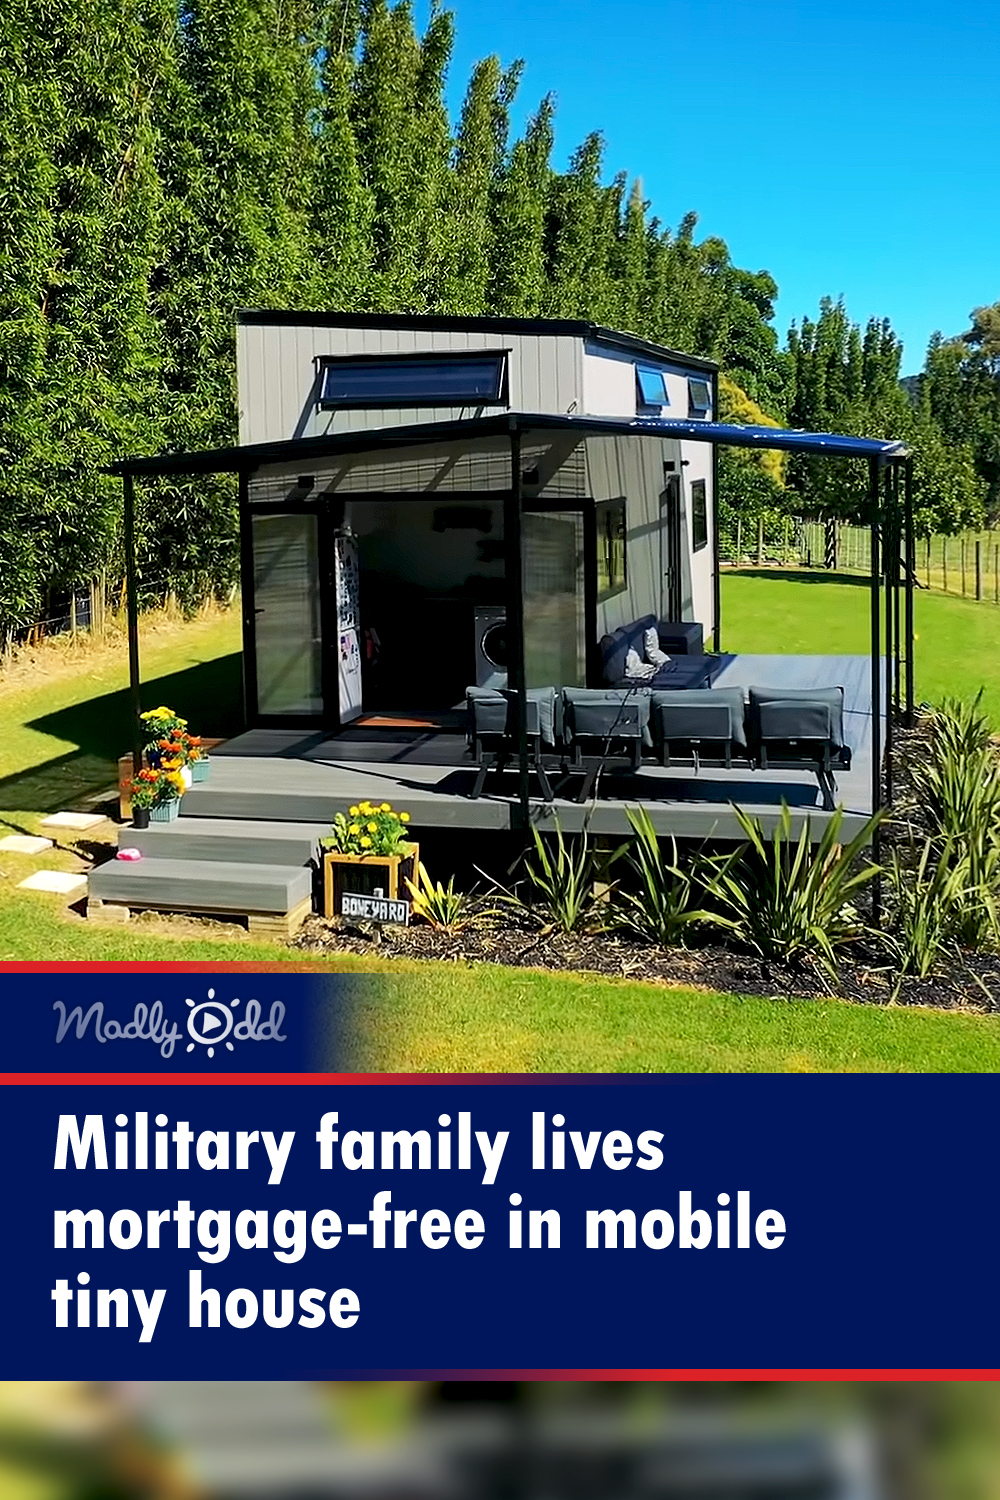 Military family lives mortgage-free in mobile tiny house